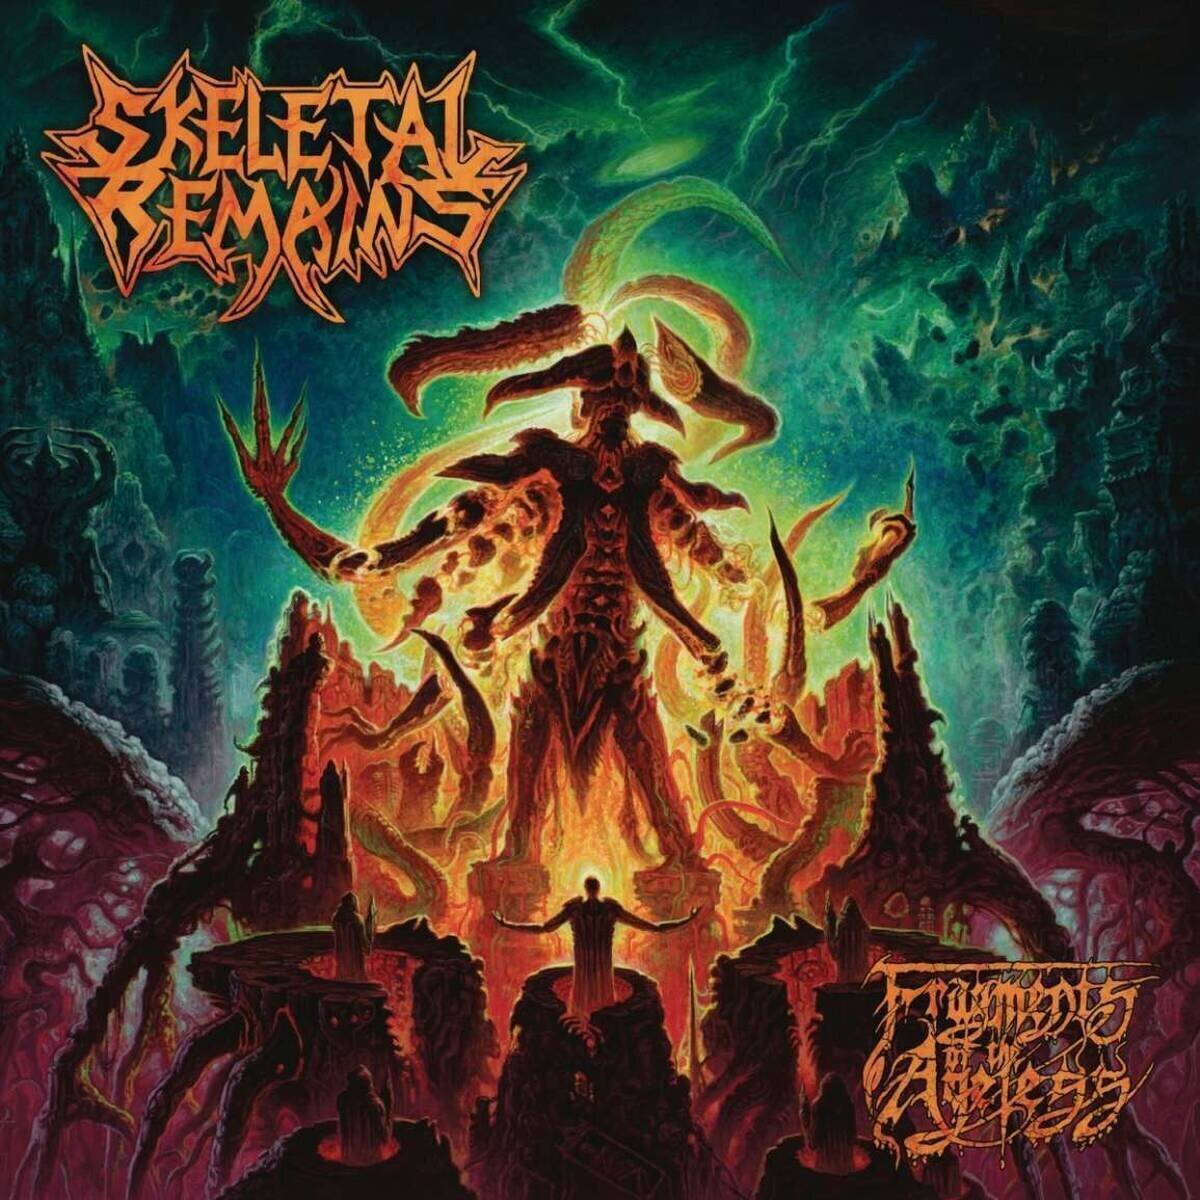 Musik-CD Skeletal Remains - Fragments Of The Ageless (Limited Edition) (CD)